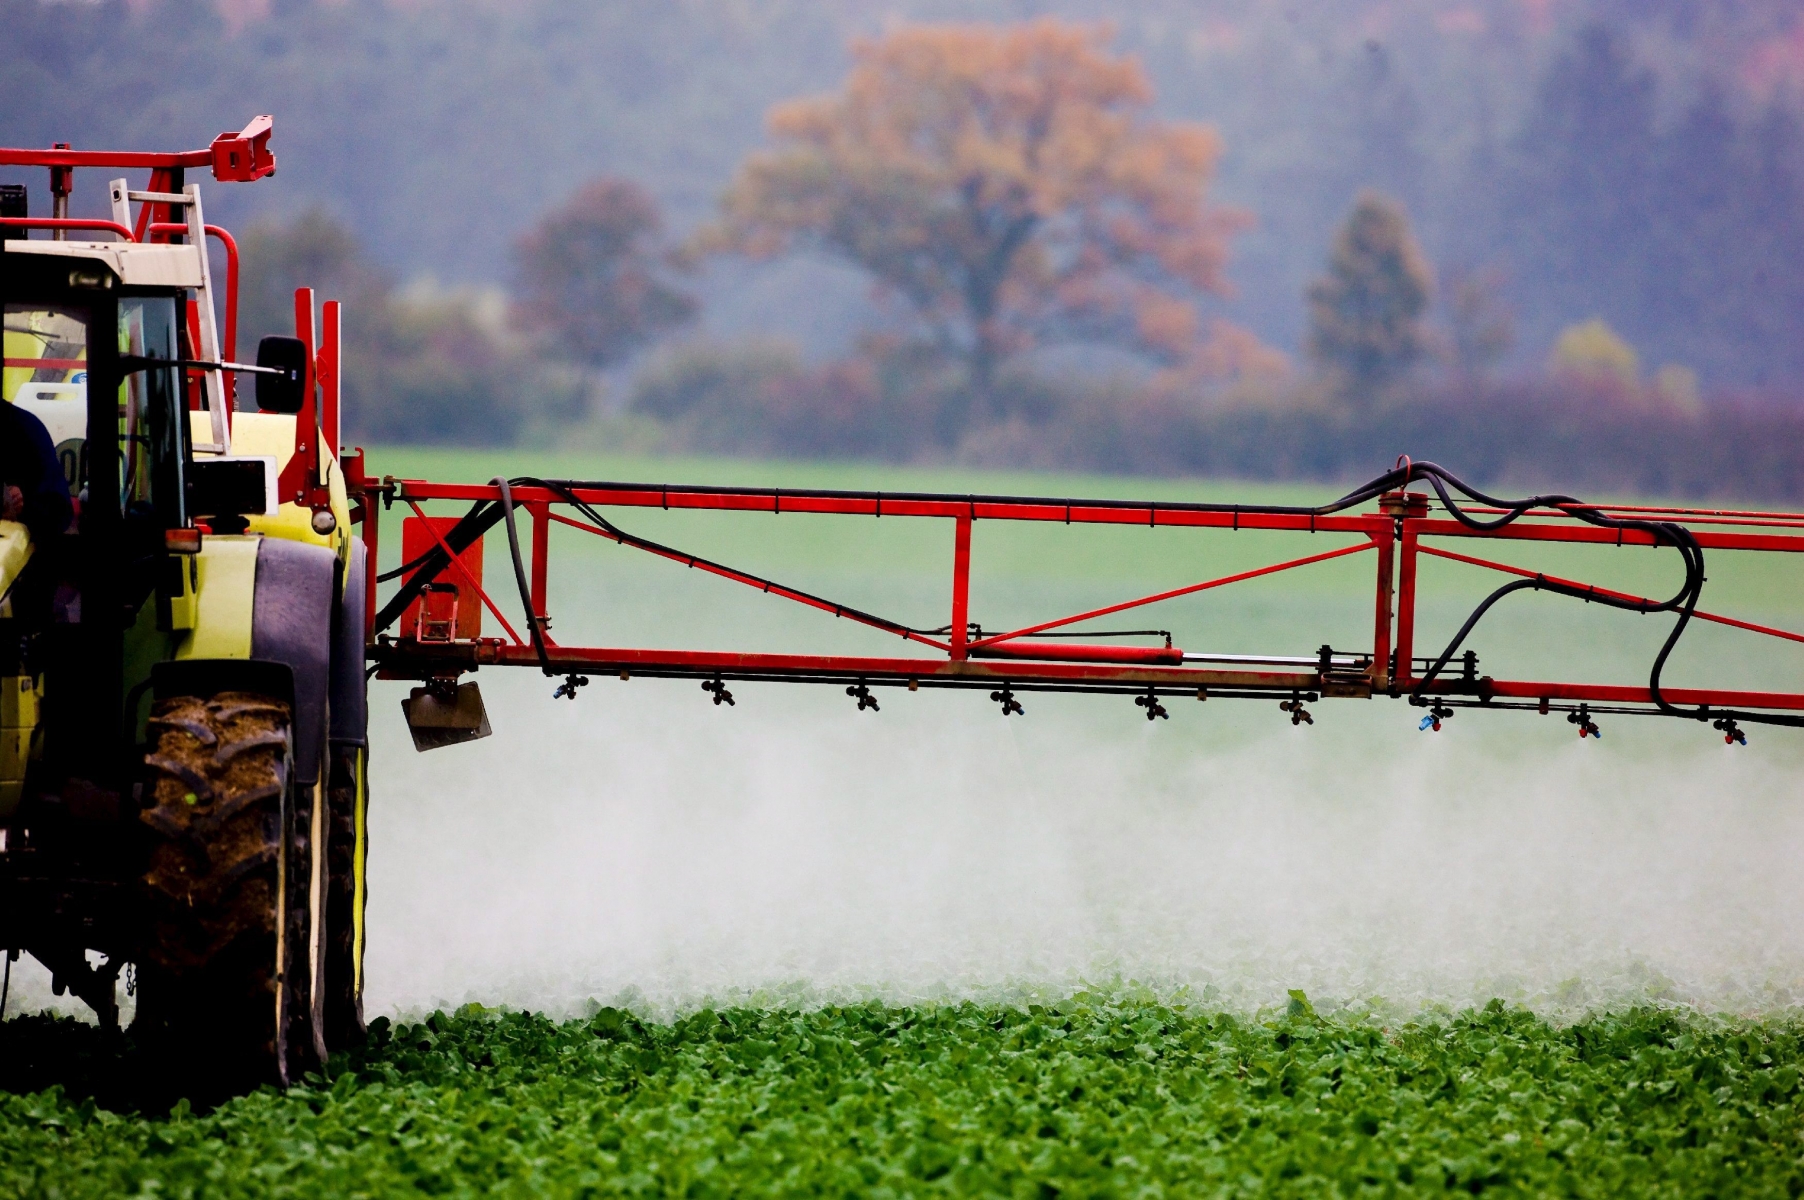 A picture dated 14 October 2008 shows a farmer spraying pesticides on his field in Germany.  EPA/PATRICK PLEUL DEUTSCHLAND LANDWIRTSCHAFT PESTIZIDE